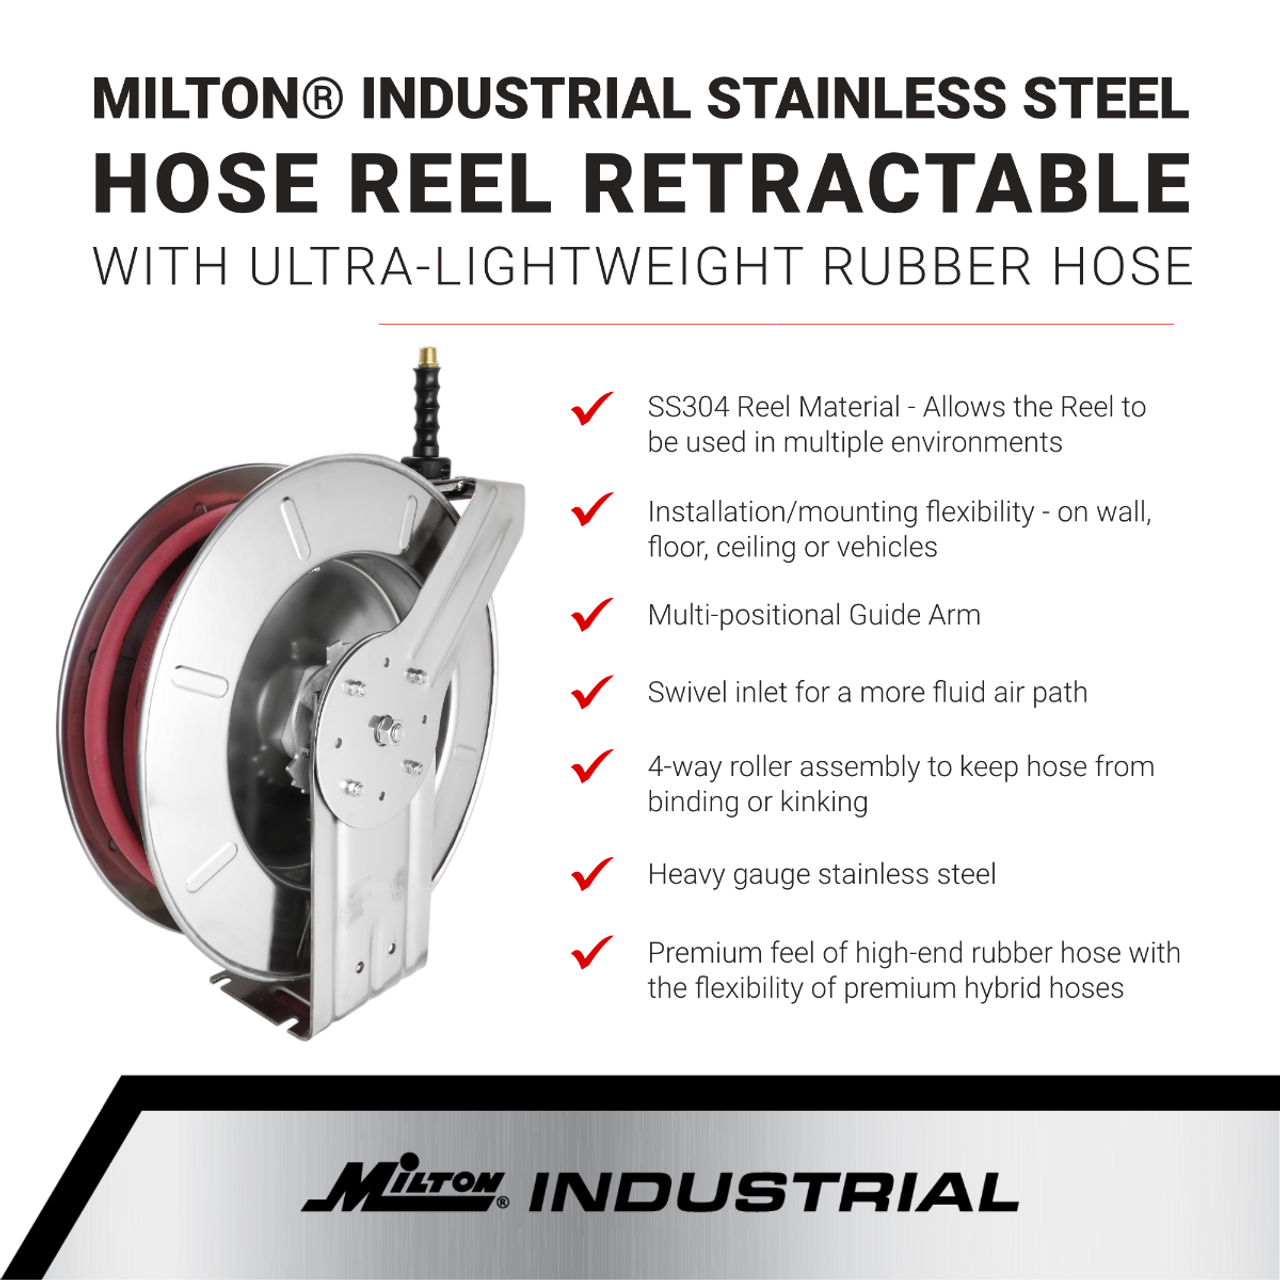 Milton? Industrial Stainless Steel Hose Reel Retractable, 3/8" ID x 25' Ultra-Lightweight Rubber hose w/ 1/4" NPT, 300 PSI